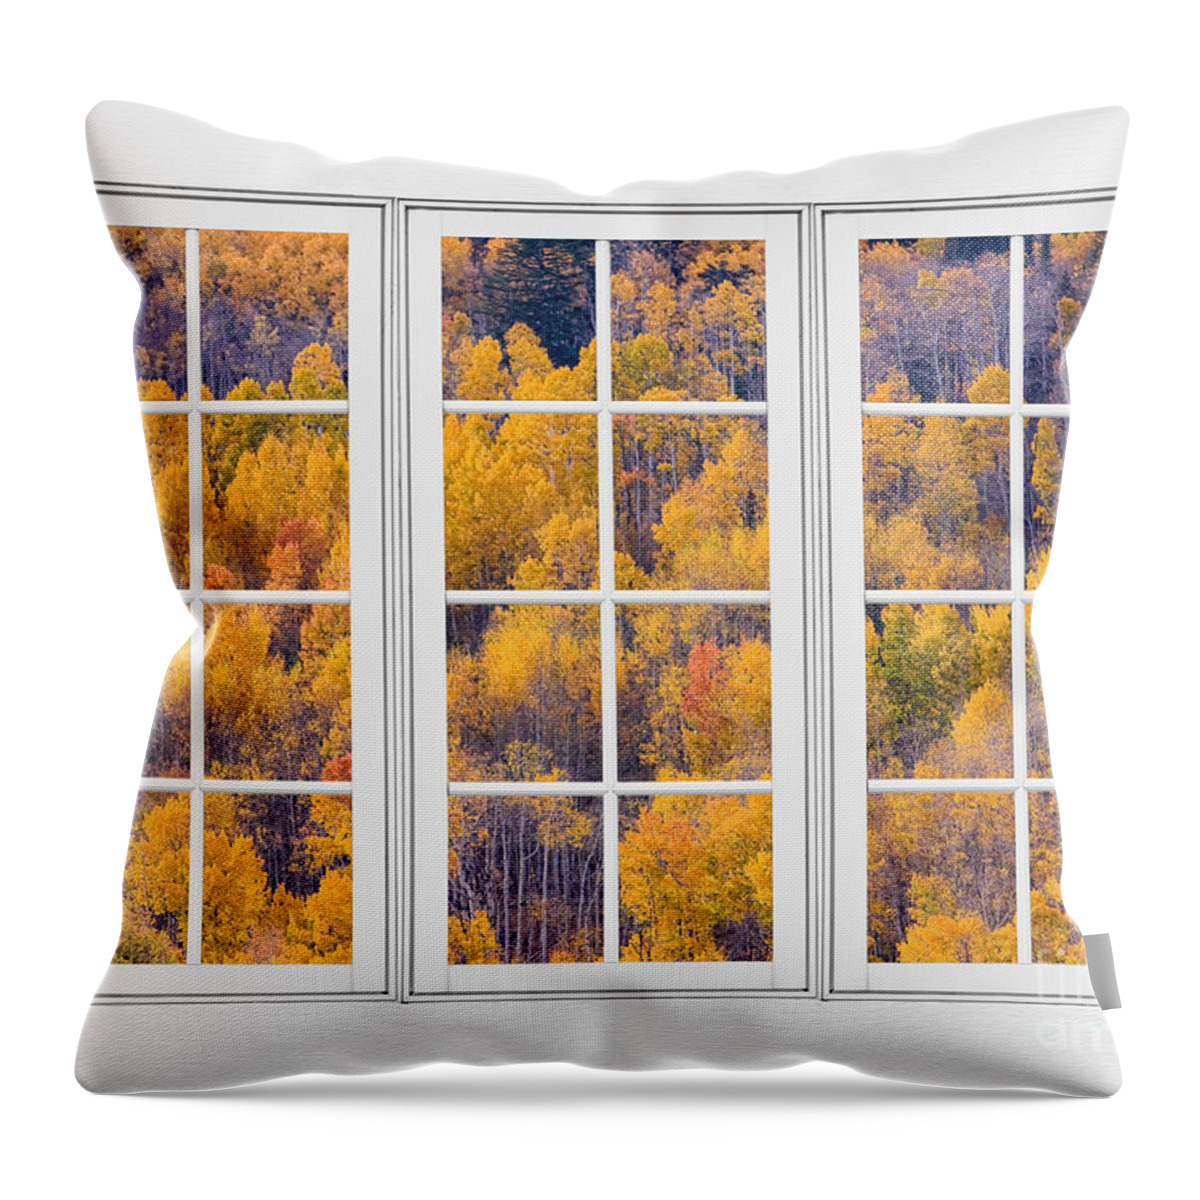 Aspen Throw Pillow featuring the photograph Autumn Aspen Trees White Picture Window View by James BO Insogna